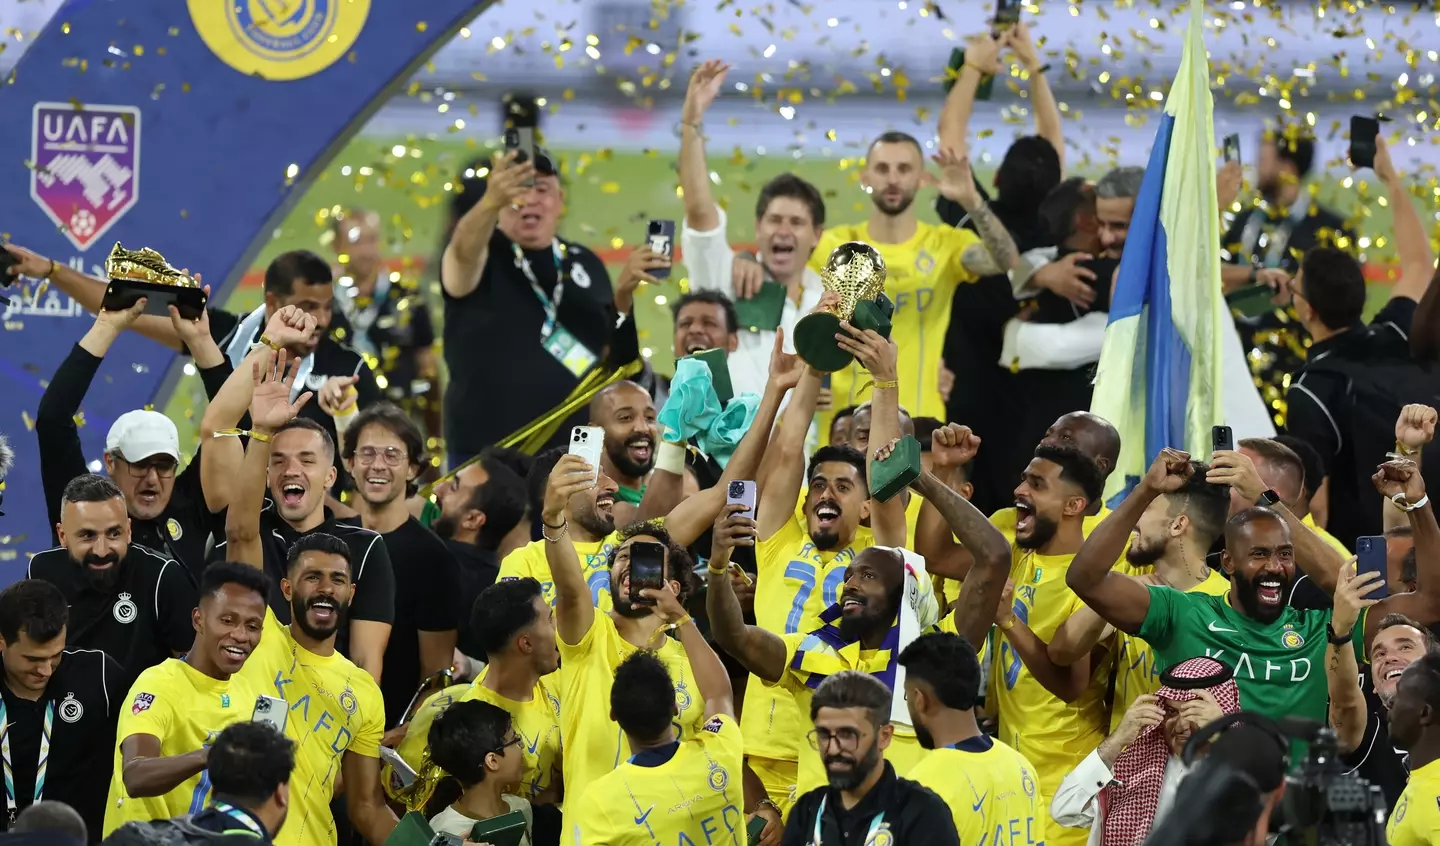 Al Nassr emerged victorious over their Saudi Pro League rivals. (